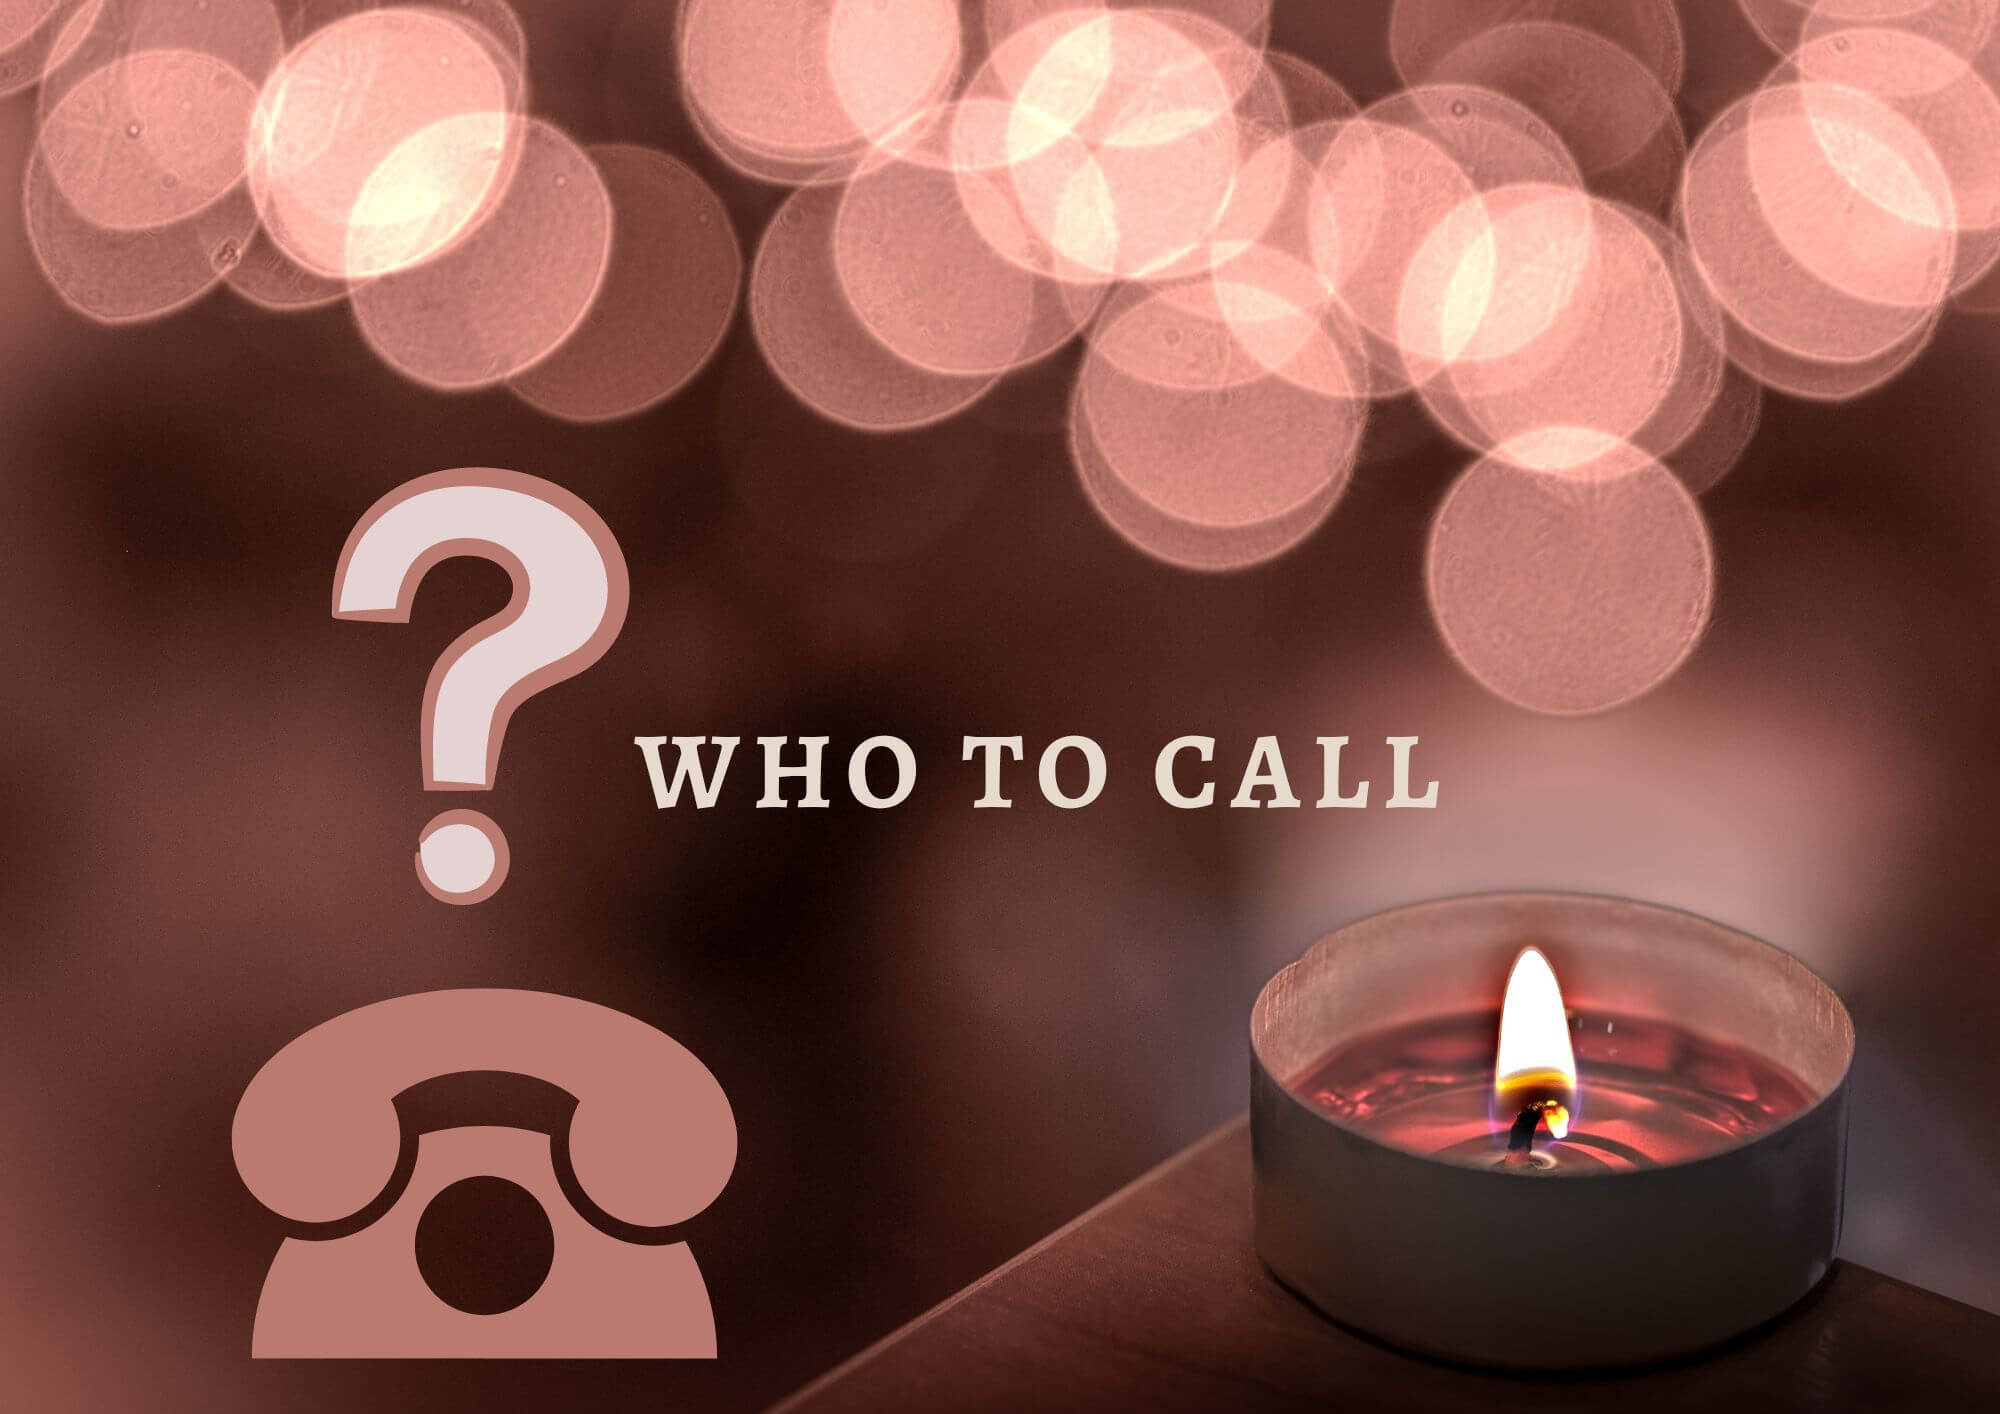 Who to call when a loved one passes, phone and question mark